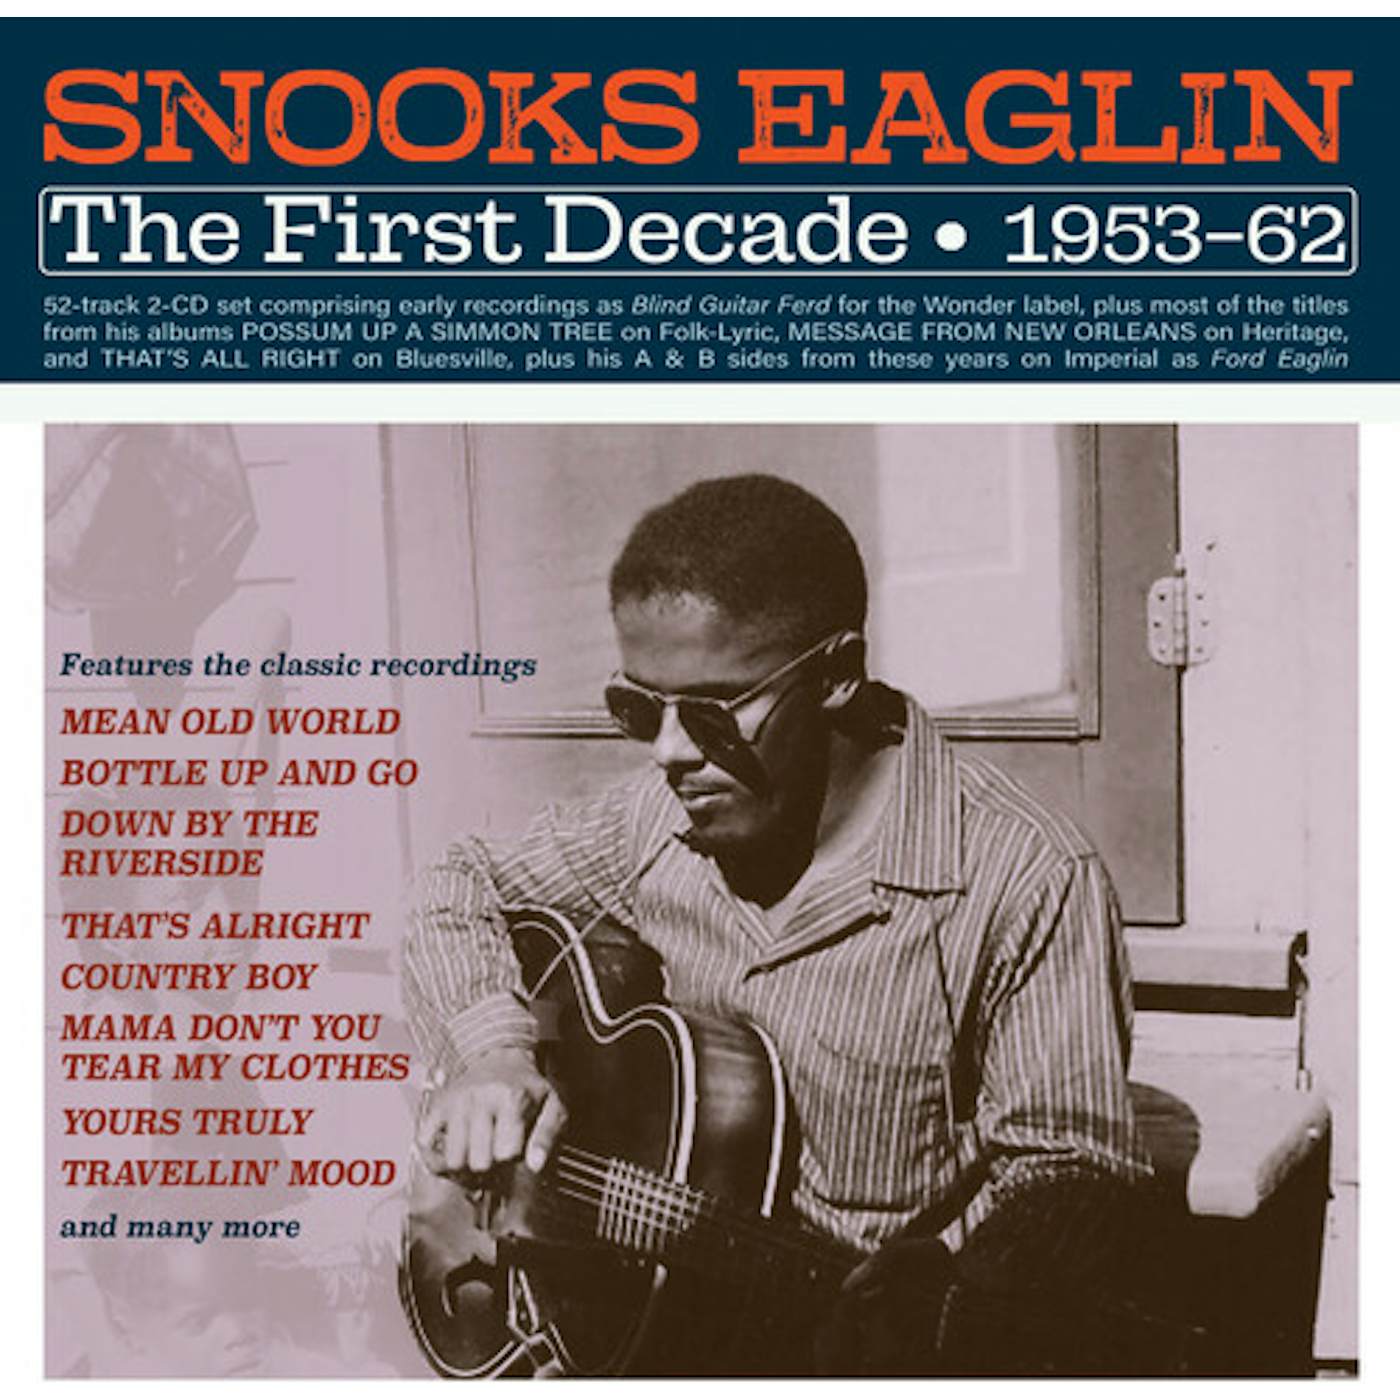 Snooks Eaglin FIRST DECADE 1953-62 CD